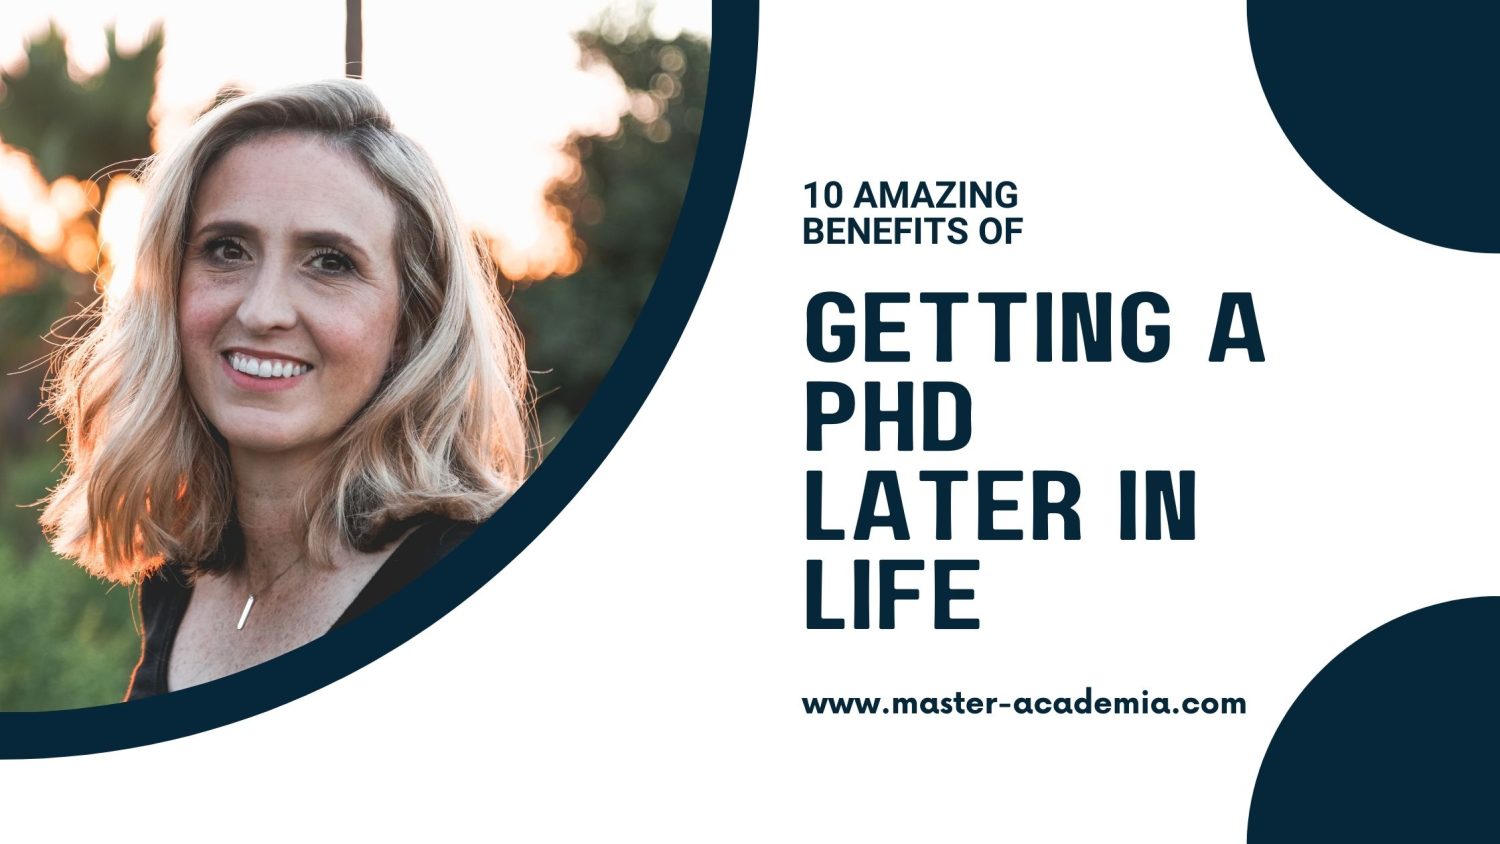 can you do a phd later in life